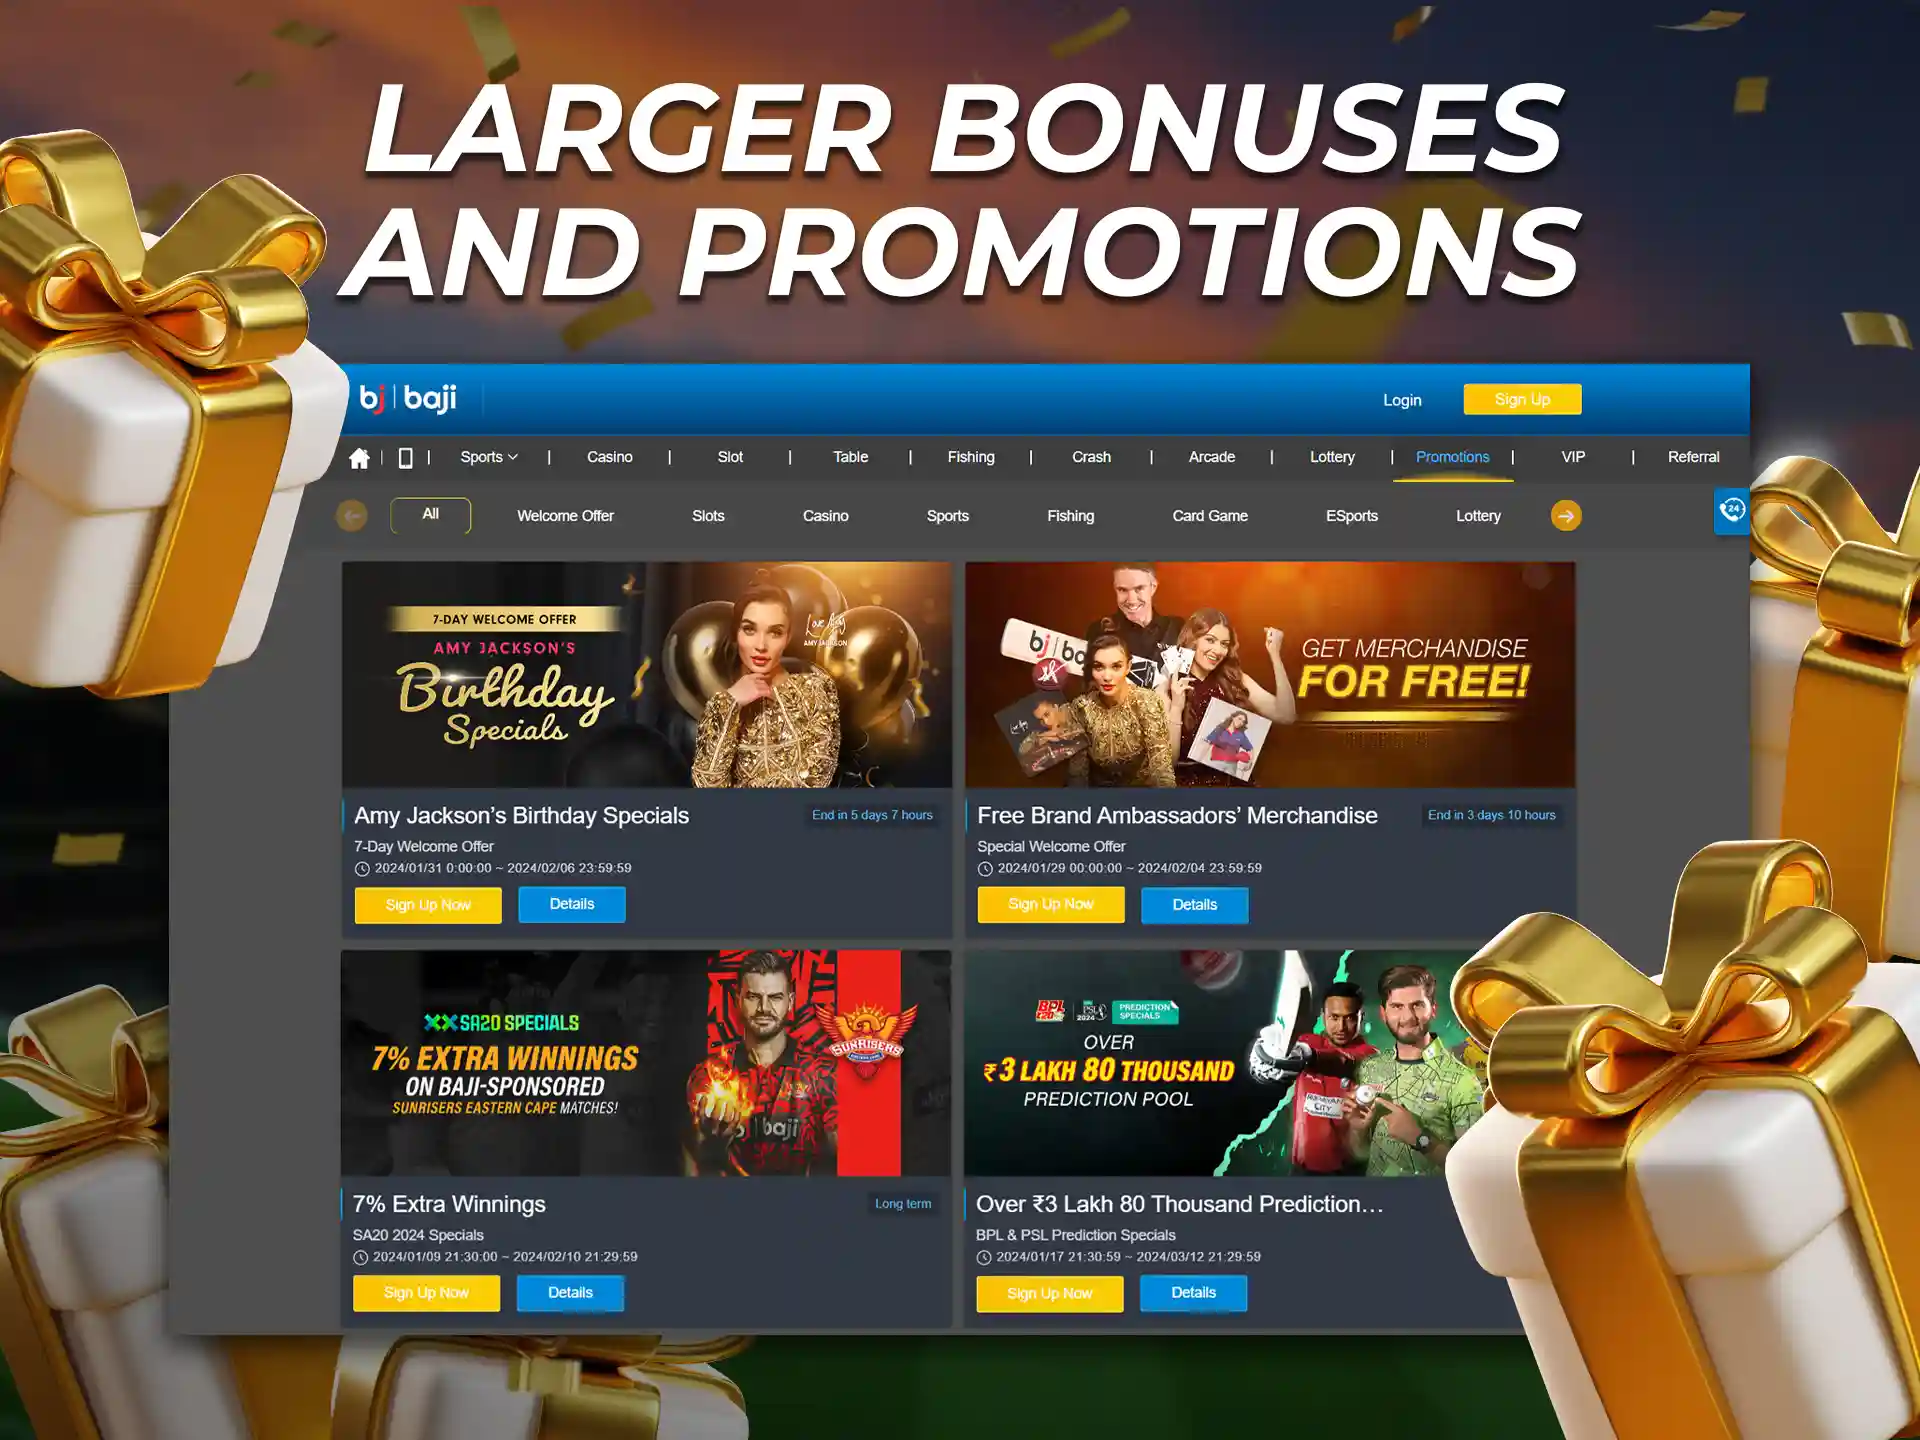 New online bookmakers offer their players great welcome bonuses, free bets and many great promotions.